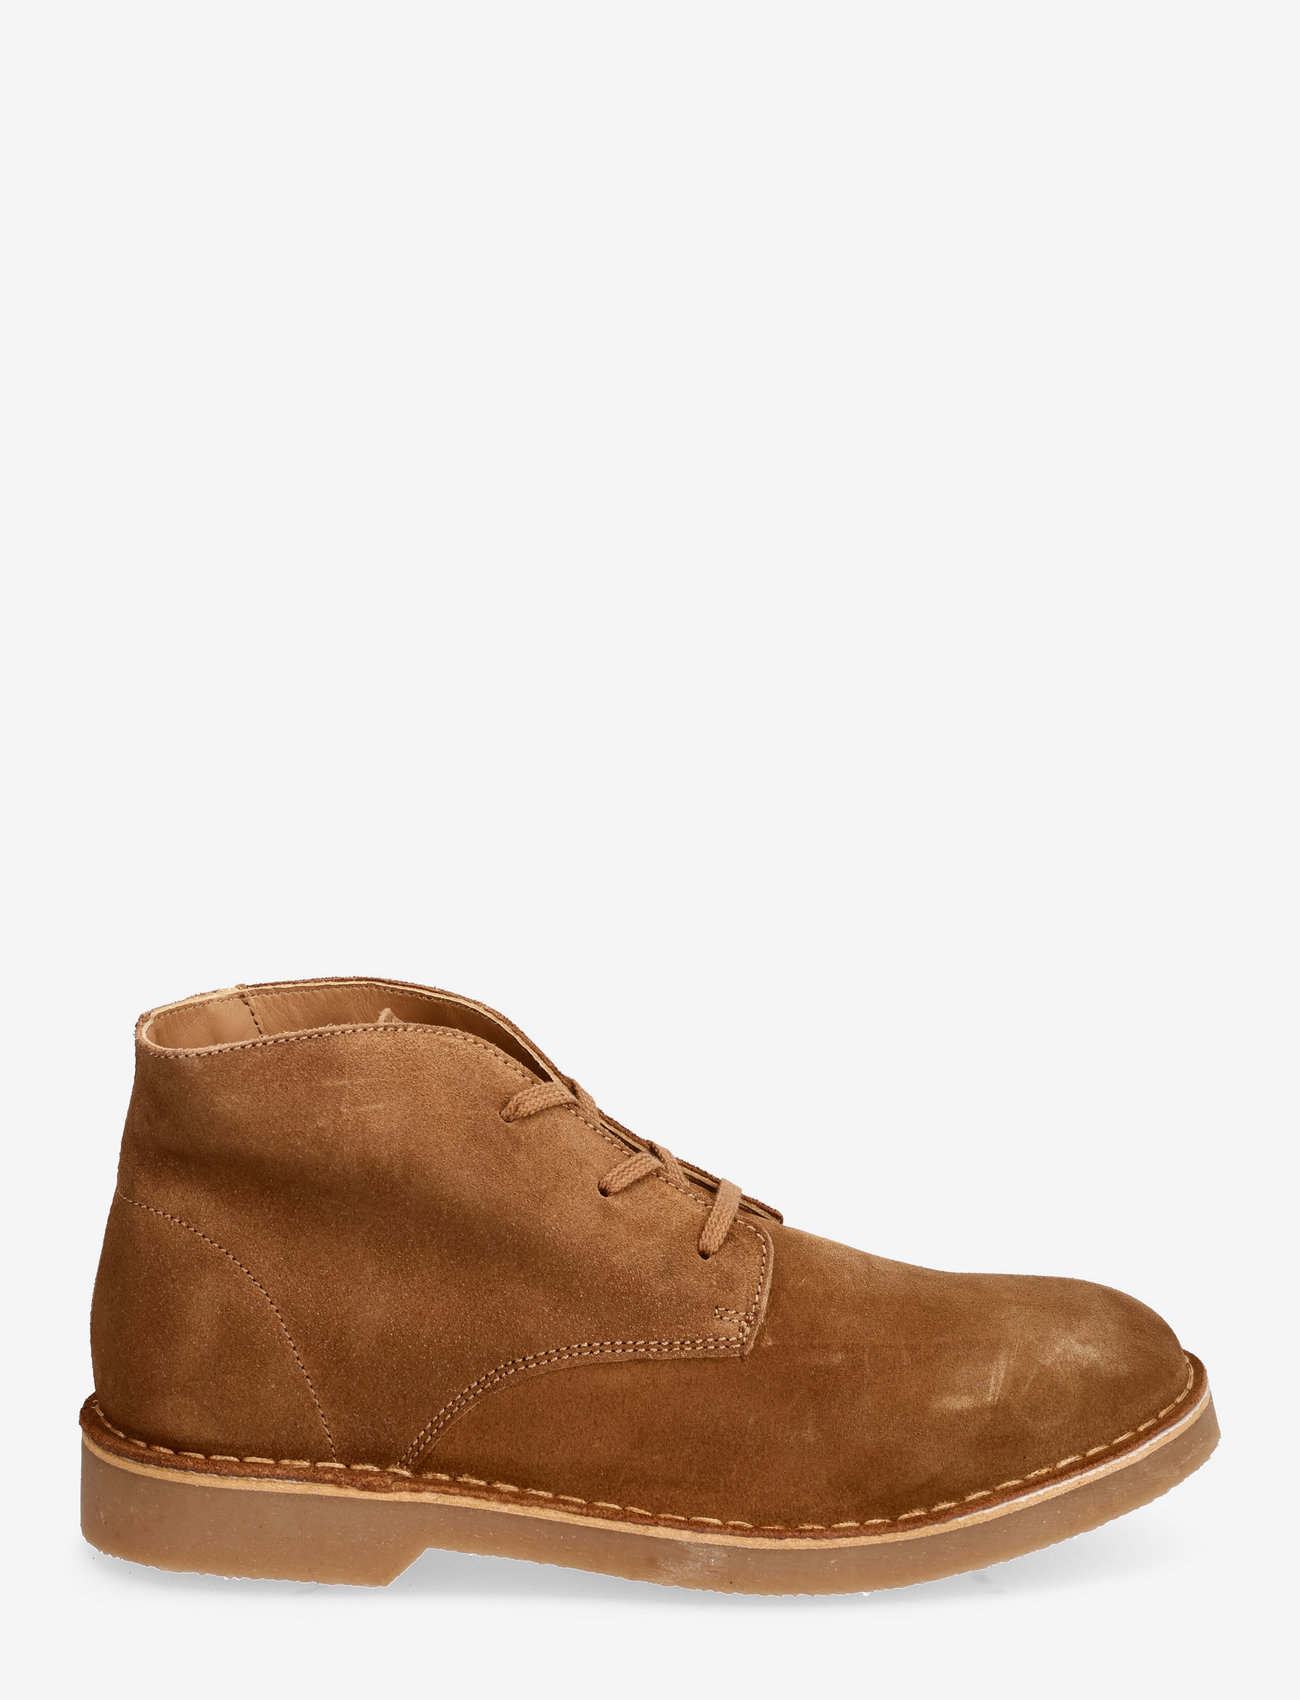 Selected Homme - SLHRIGA NEW SUEDE CHUKKA BOOT B - aavikkokengät - tobacco brown - 1